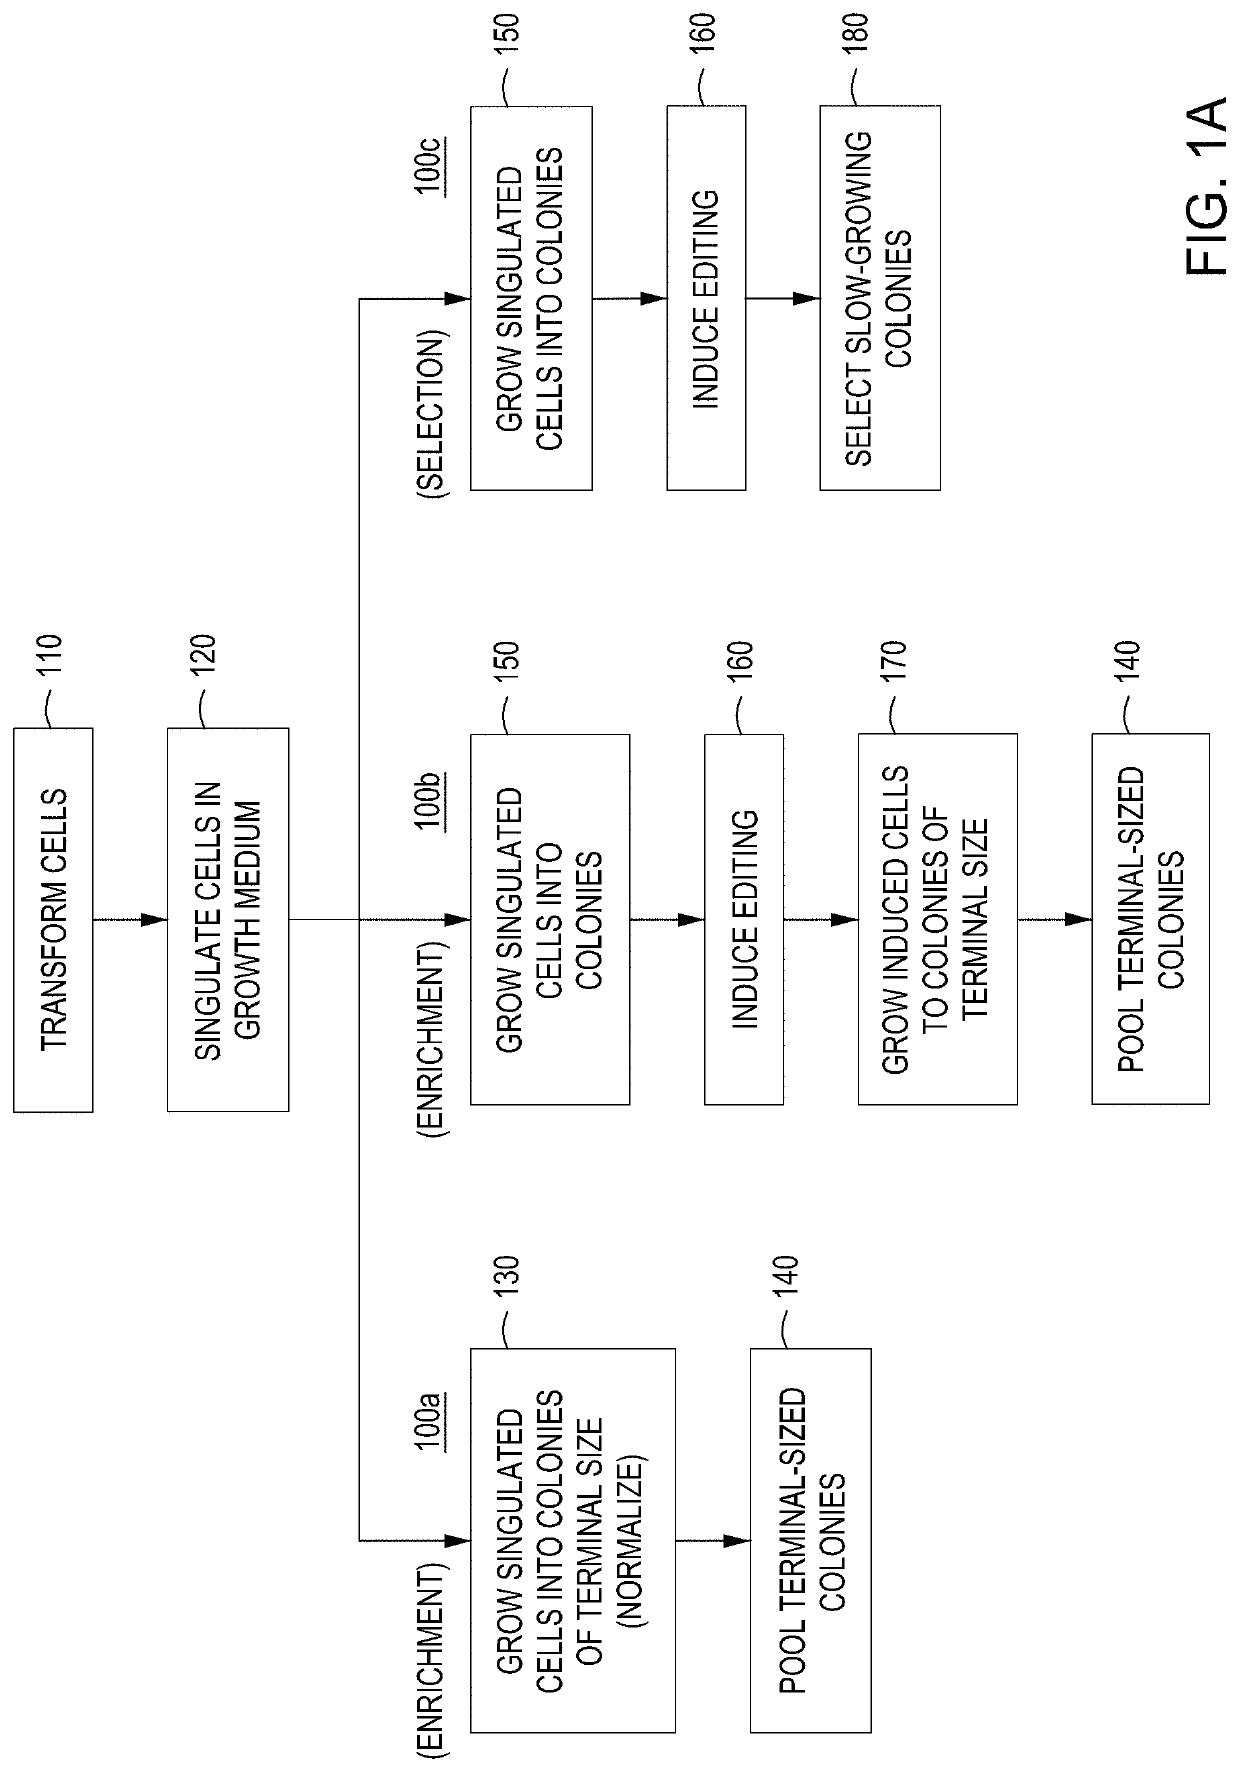 Detection of nuclease edited sequences in automated modules and instruments